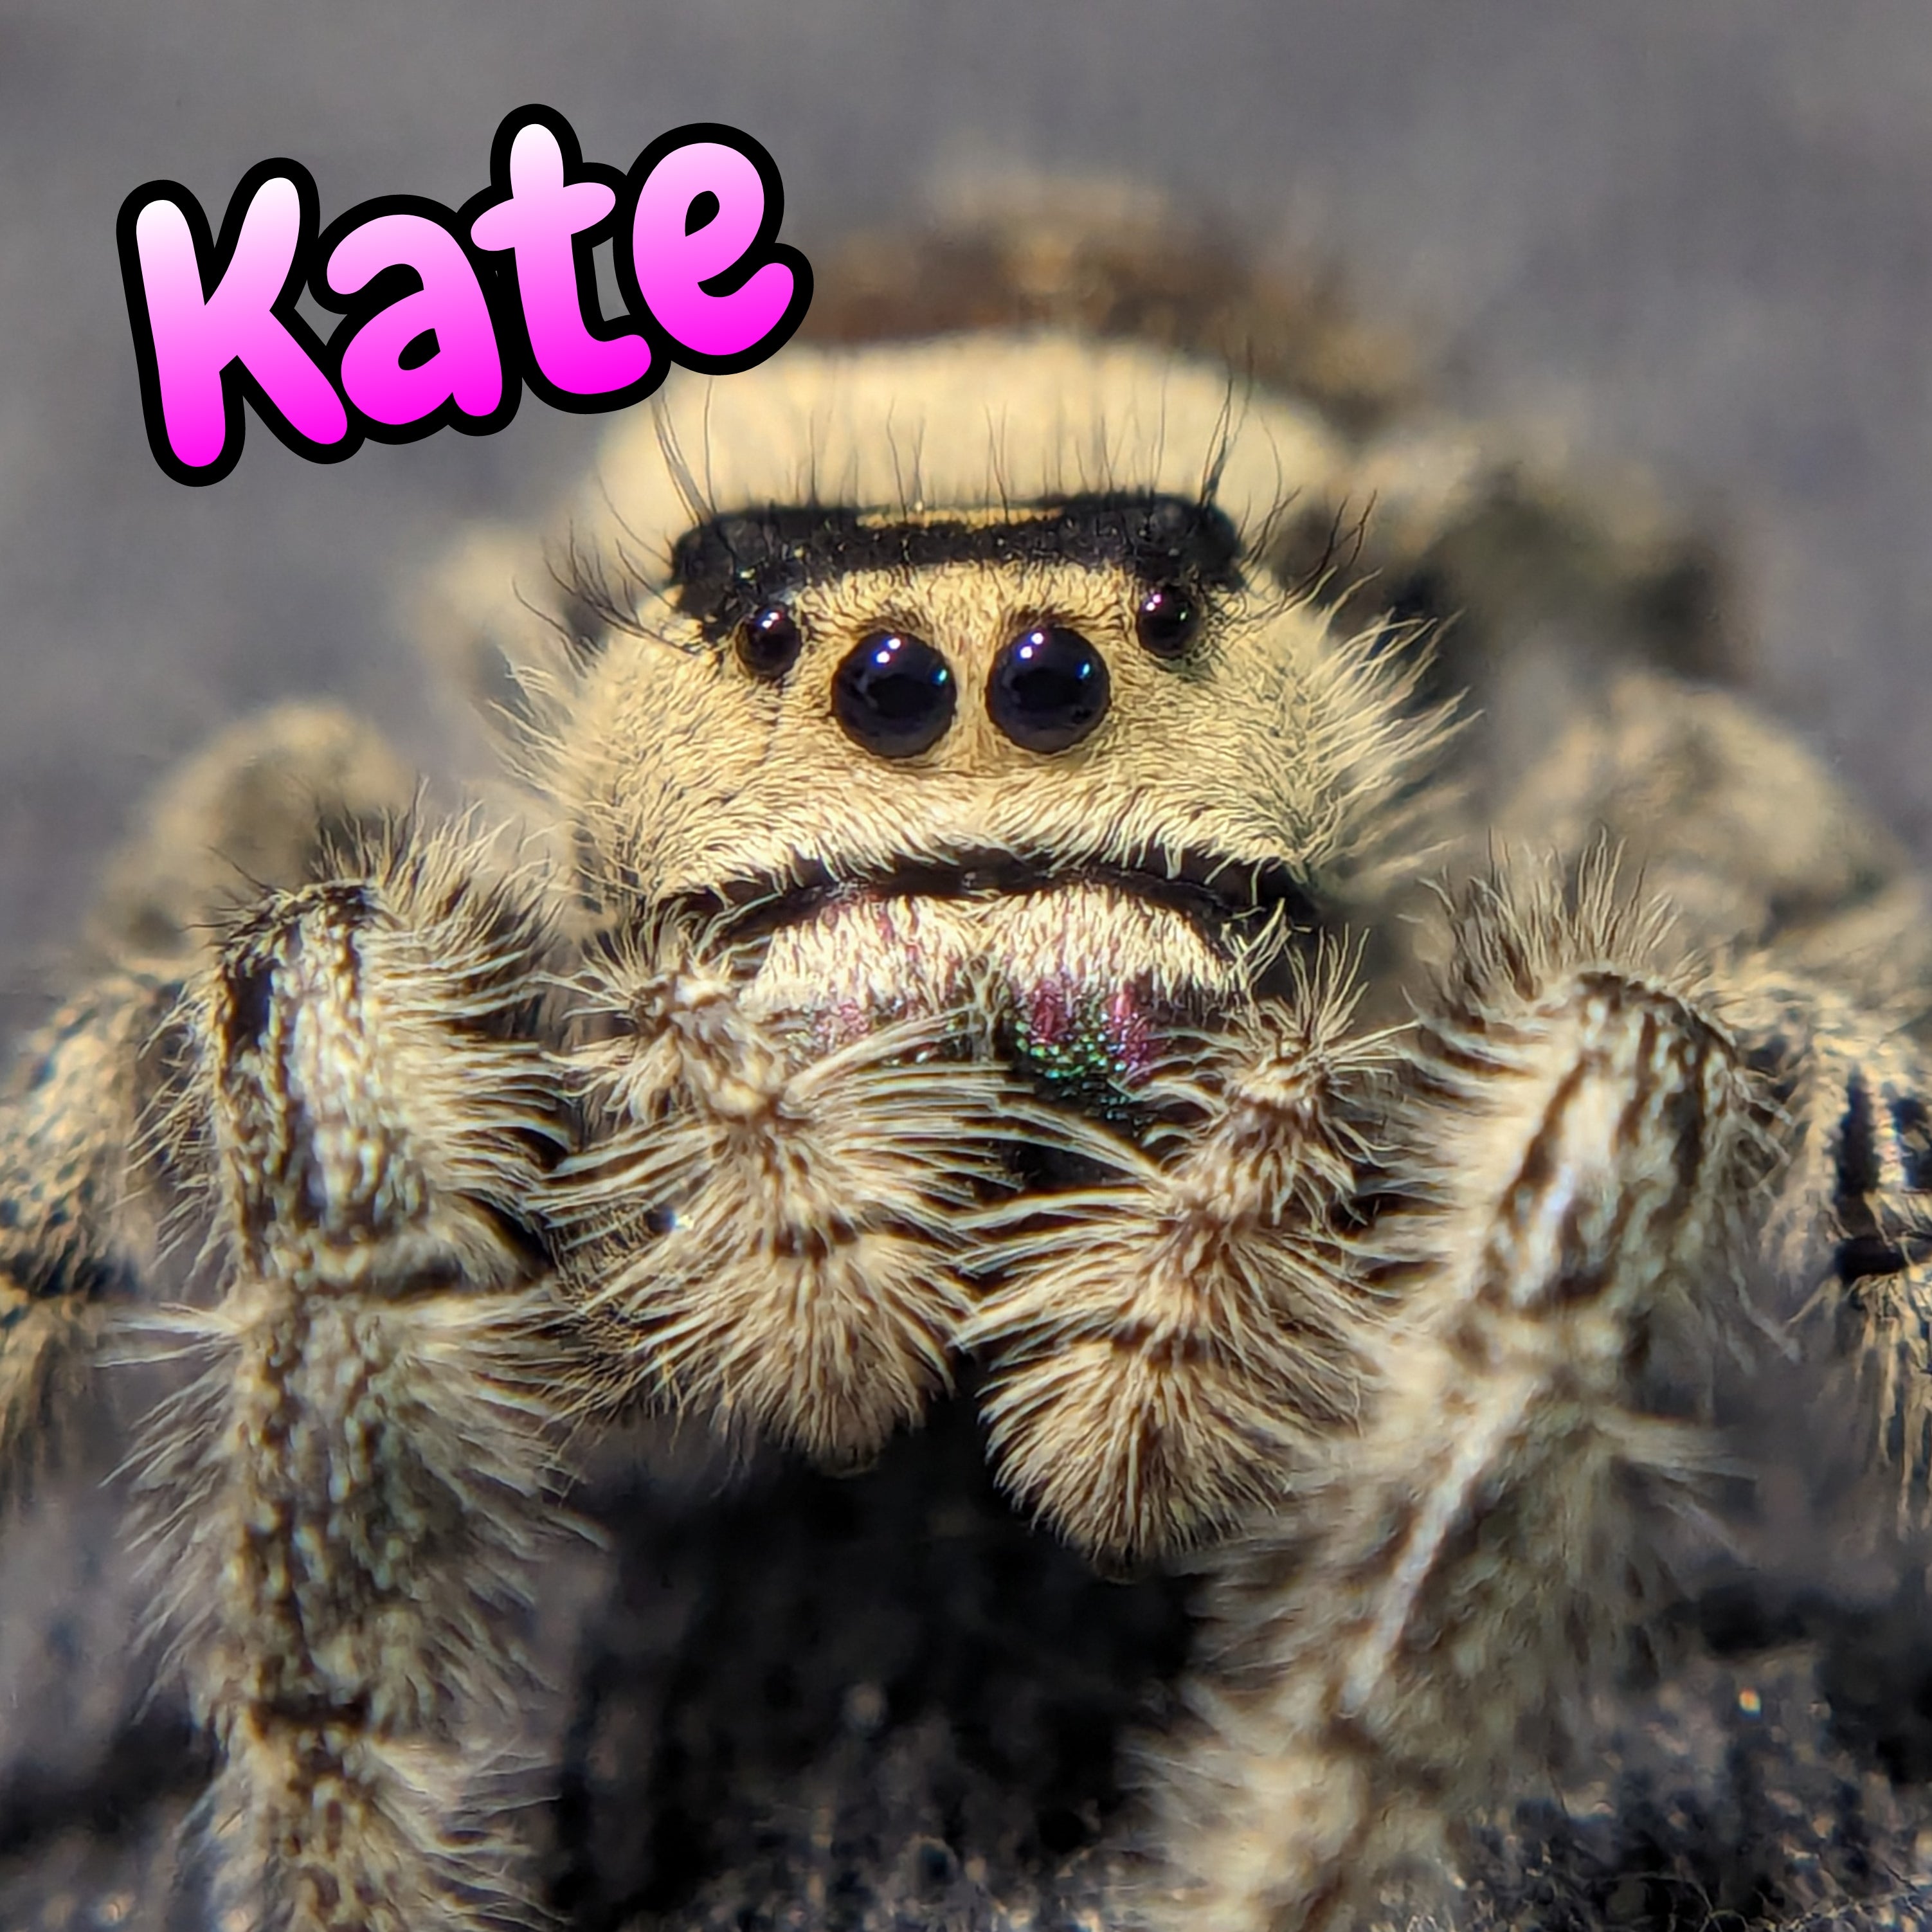 Regal Jumping Spider "Kate"